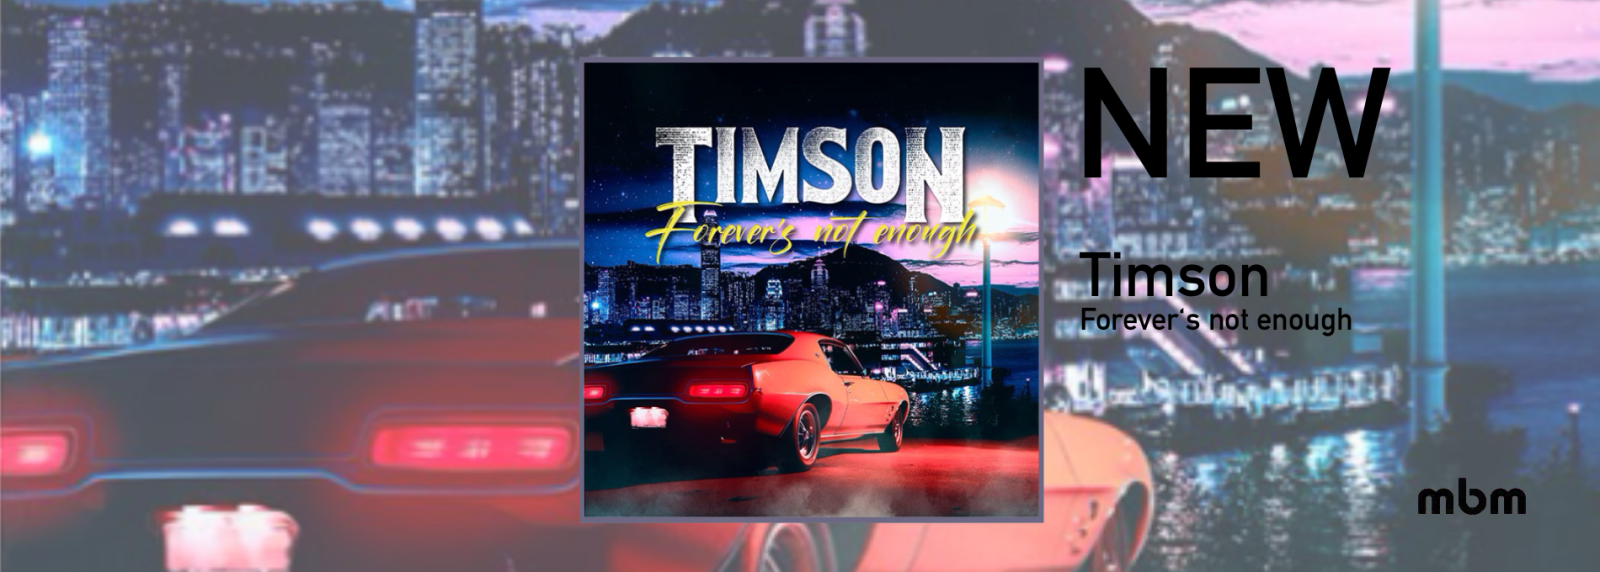 TIMSON - Forever's not enough